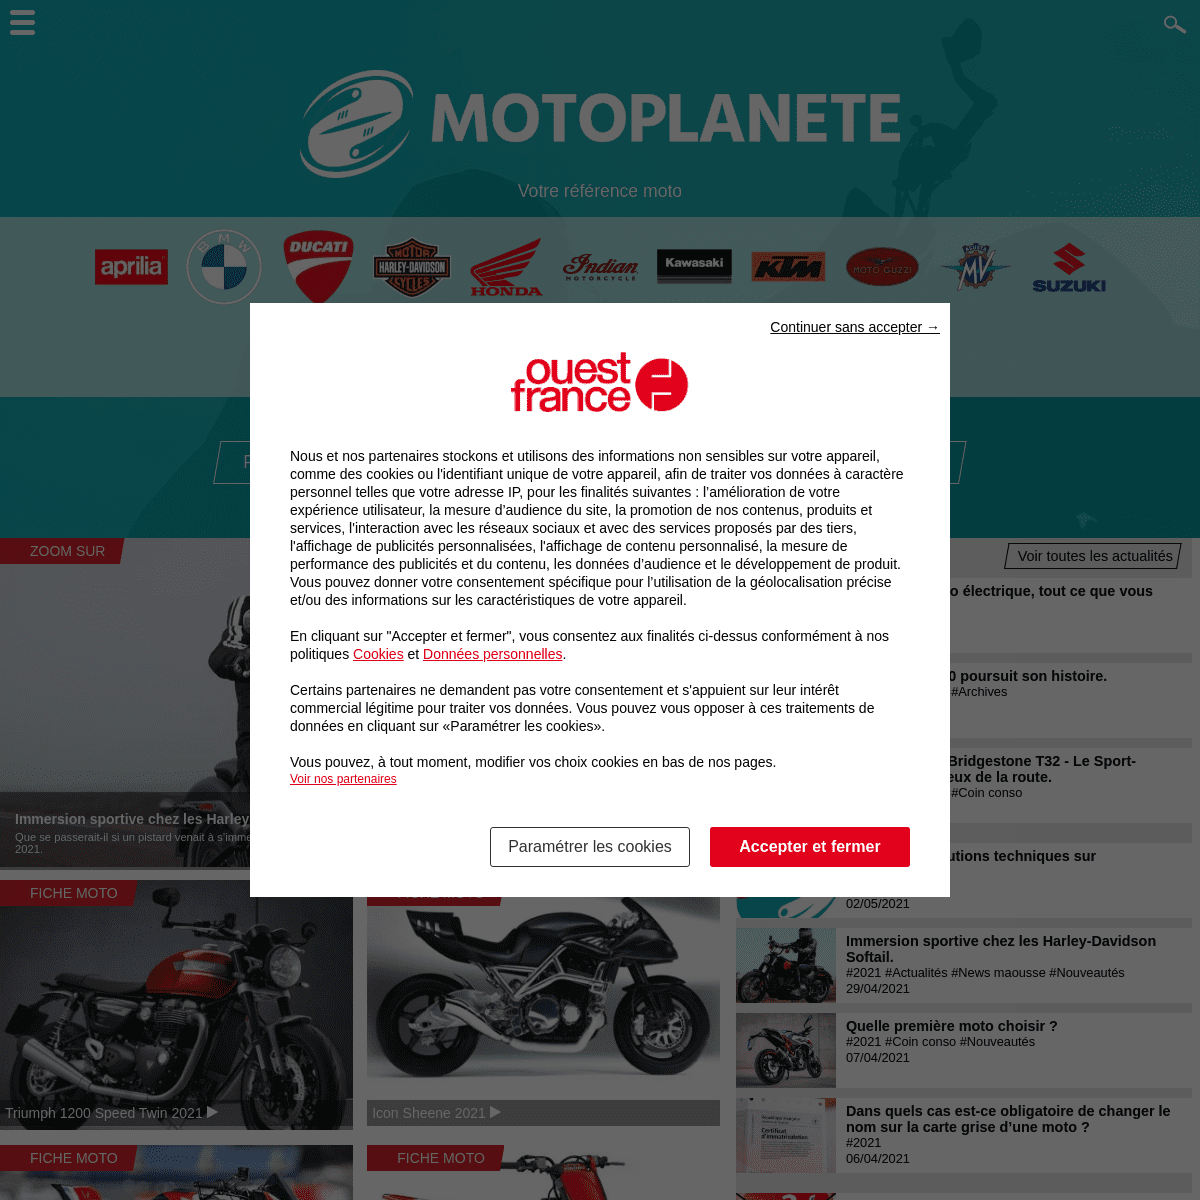 A complete backup of https://motoplanete.com